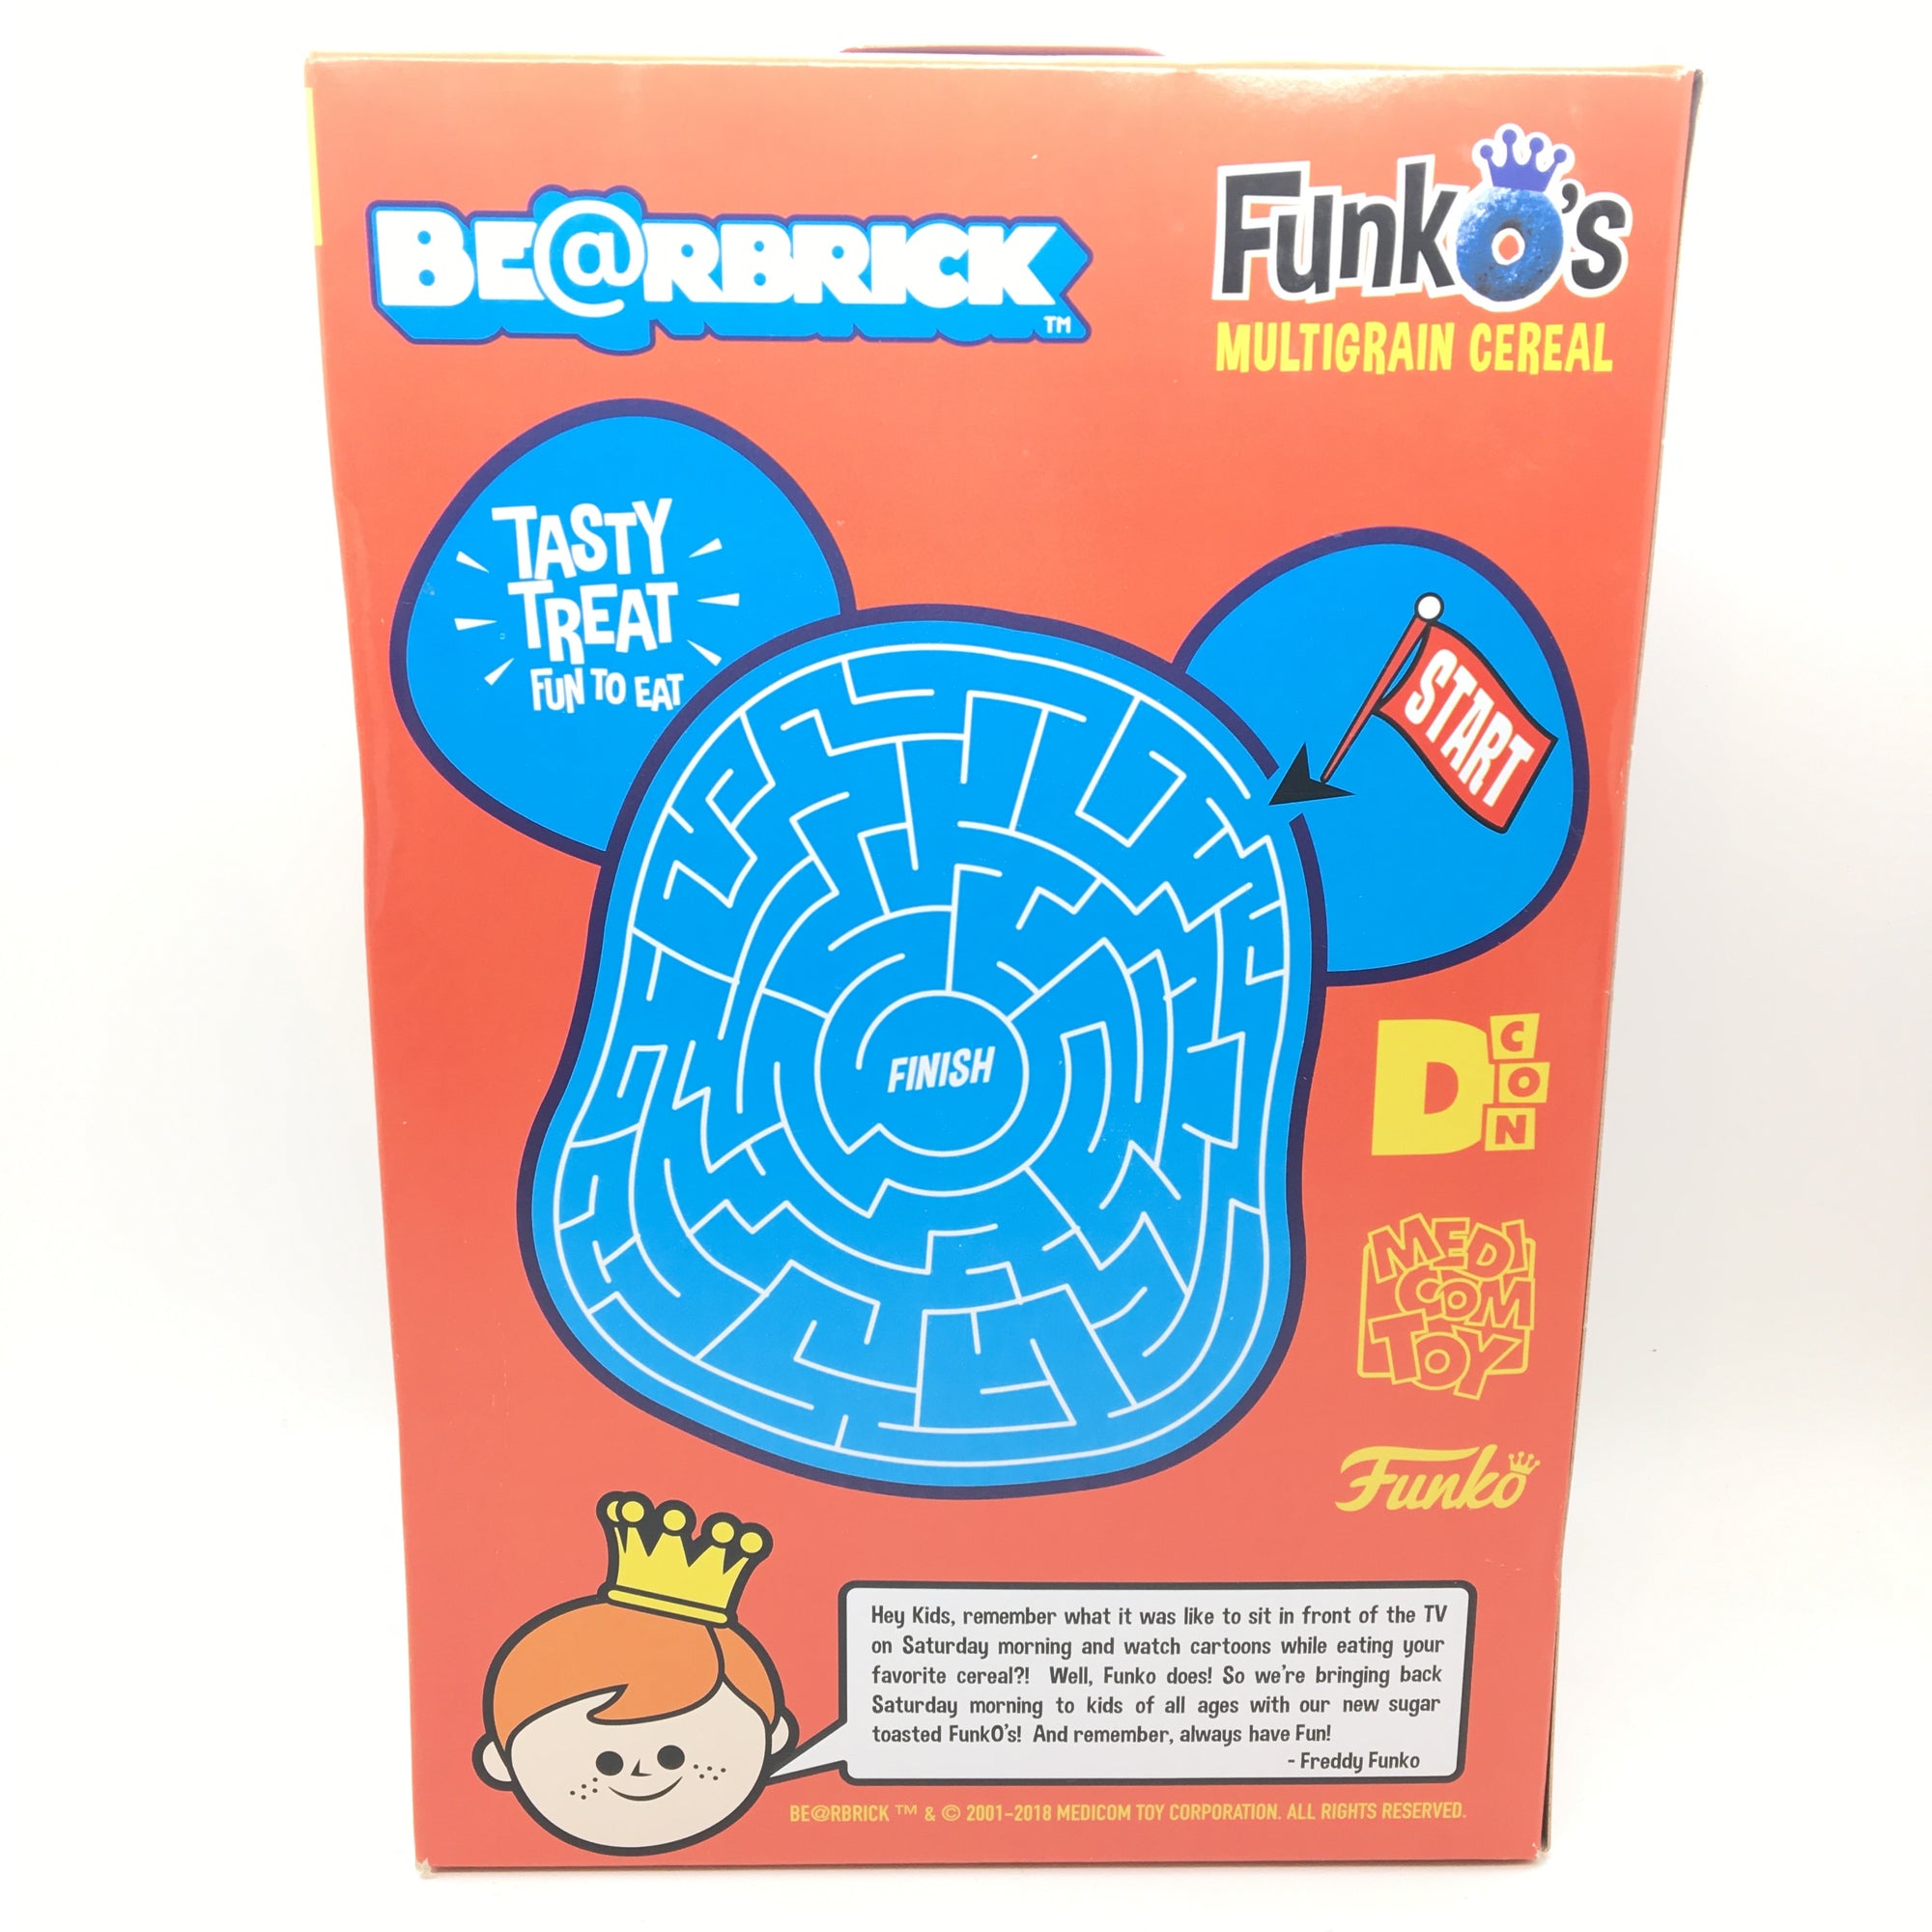 Bearbrick Funko's Cereal with 100% Bearbrick Figure Designer Con ( DCON ) Exclusive - Red Box